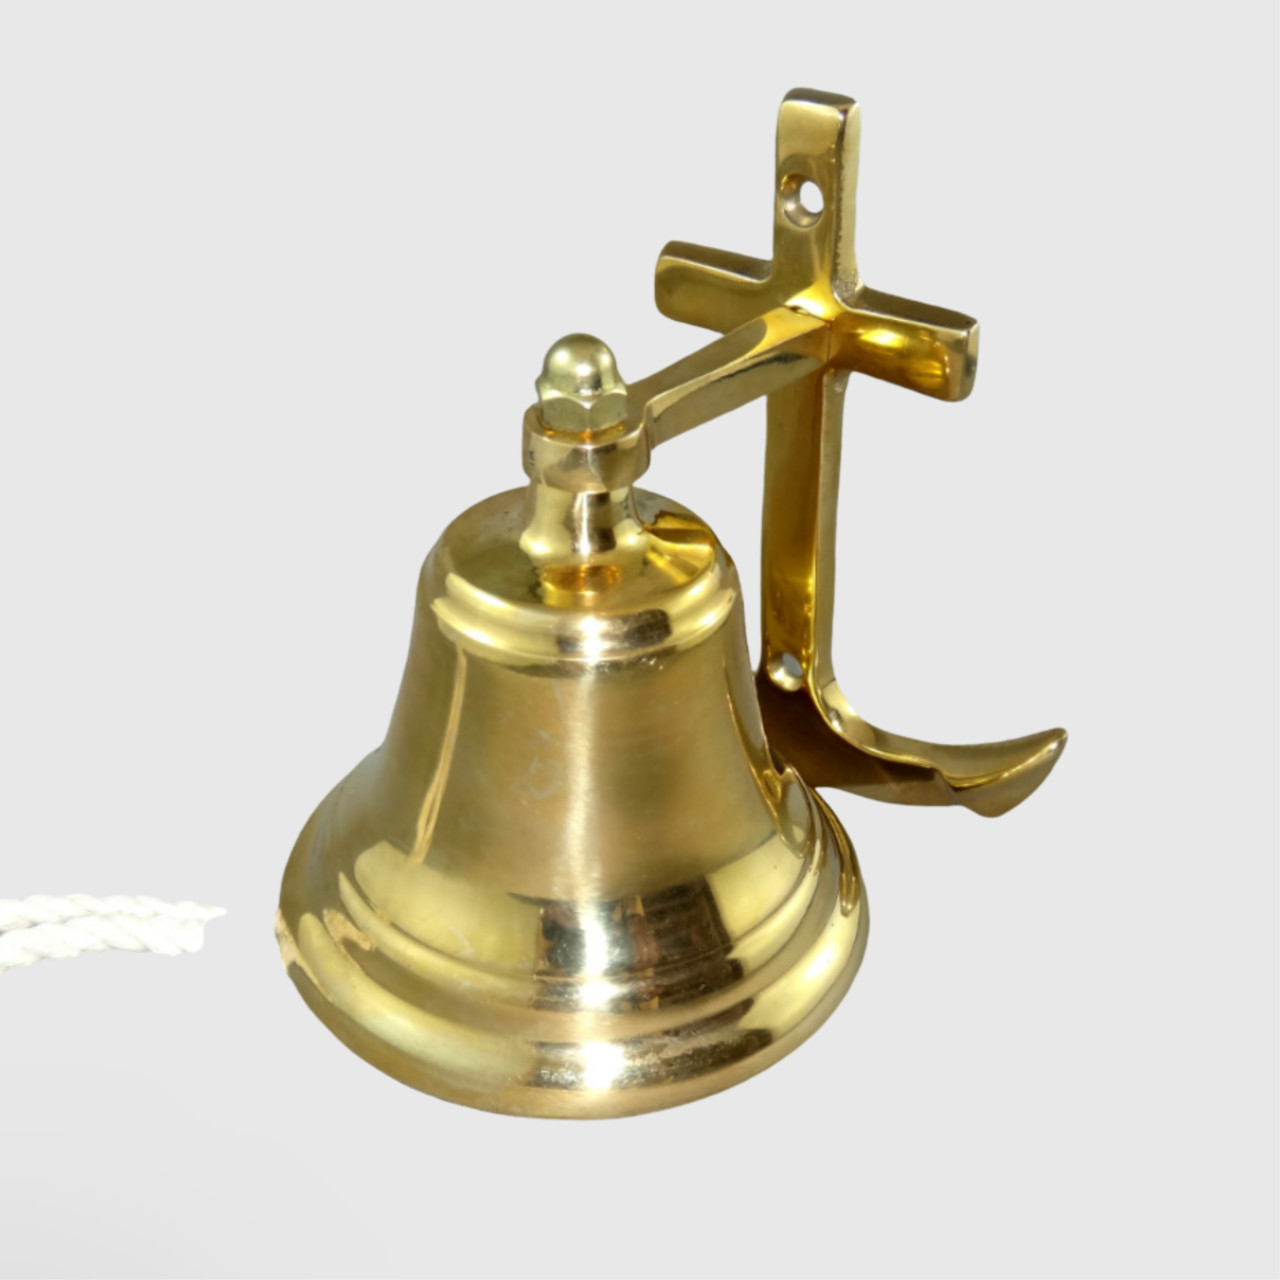 Brass bell, Woodturning project parts